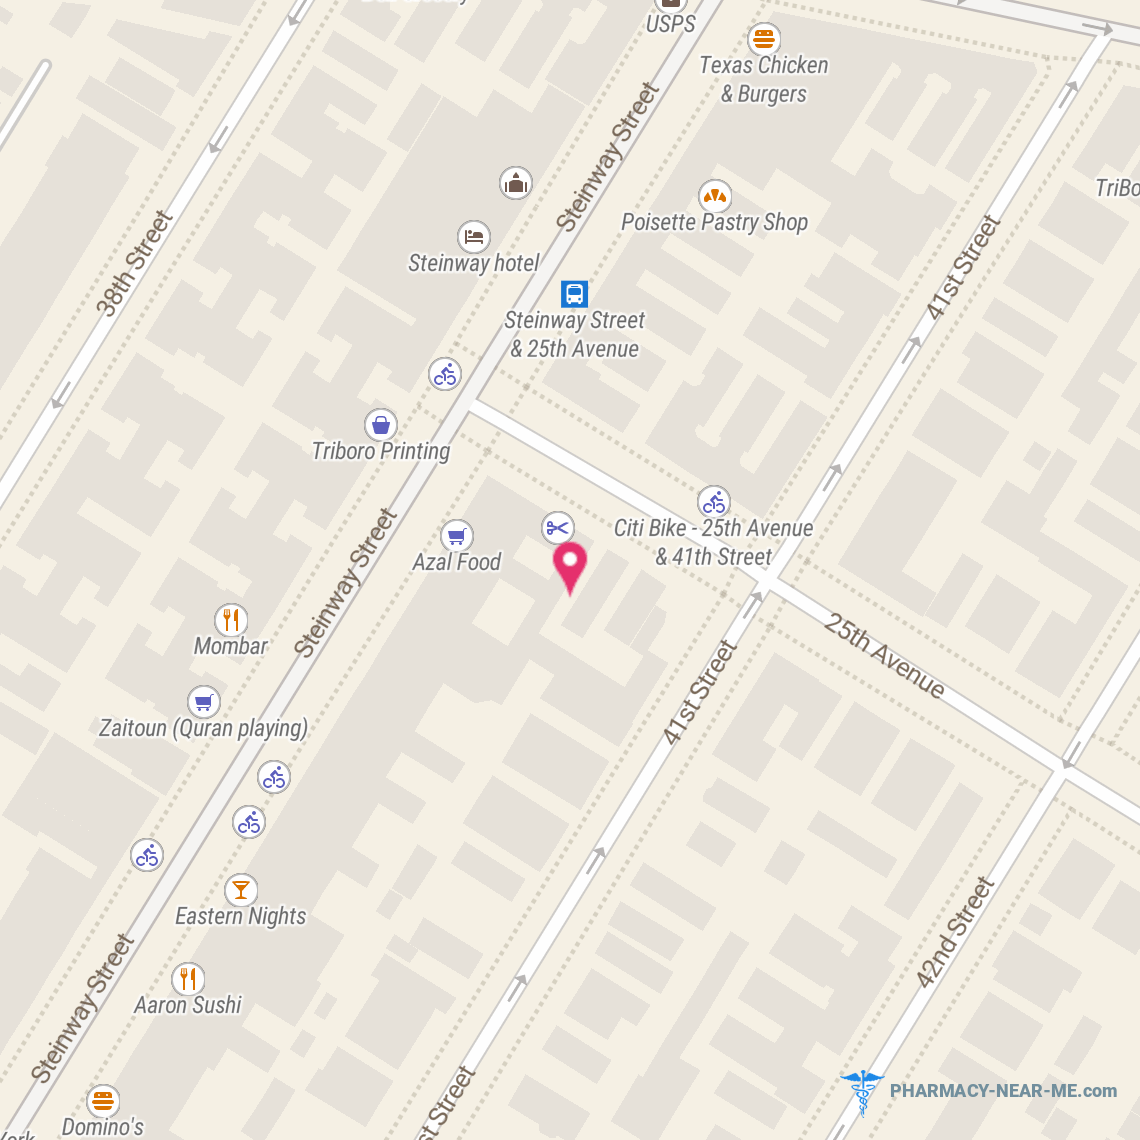 NILE CITY PHARMACY - Pharmacy Hours, Phone, Reviews & Information: 40-10 25th Avenue, Queens, New York 11103, United States